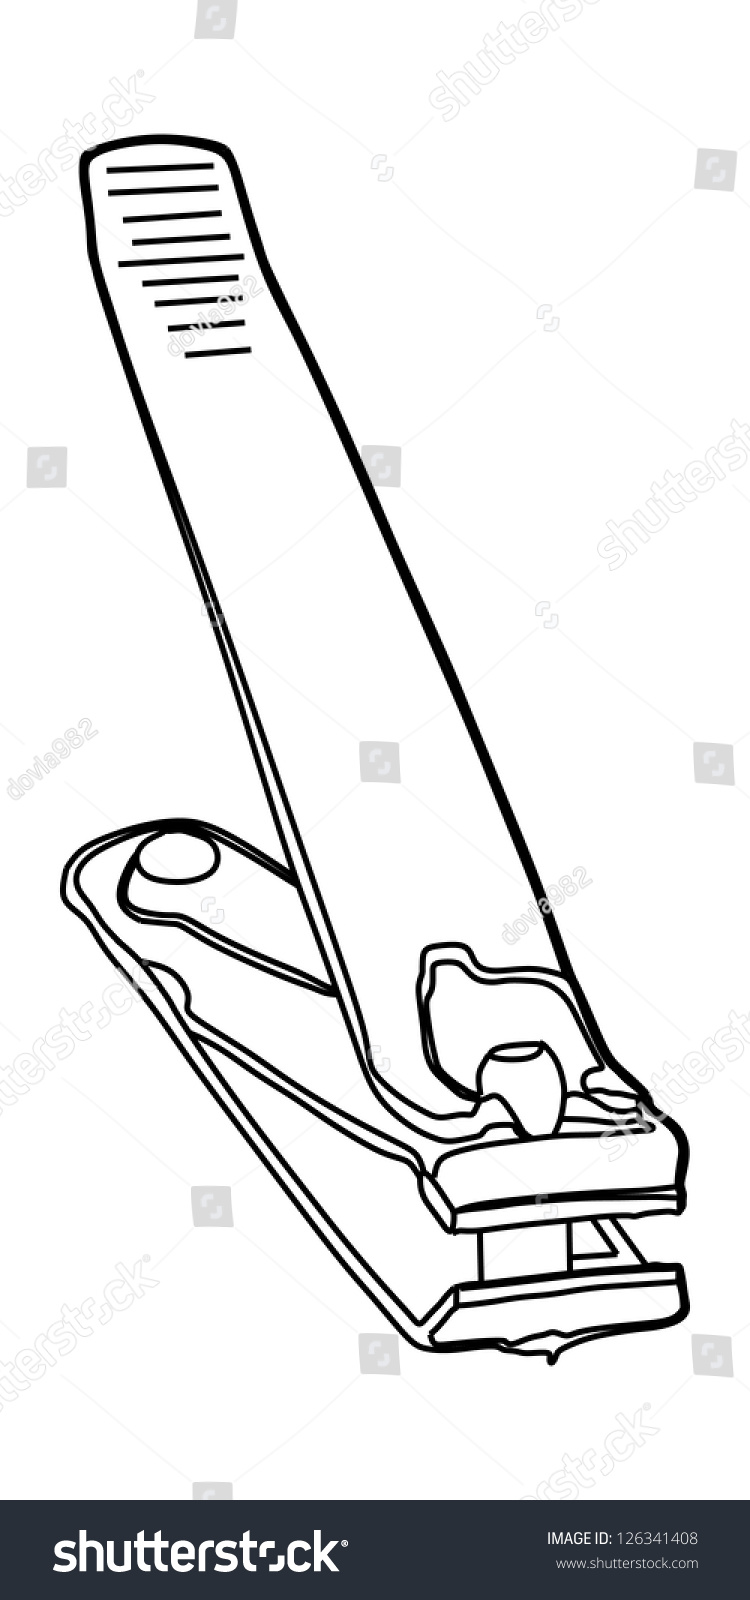 Close-Up Of A Nail Clipper Stock Vector Illustration 126341408 ...